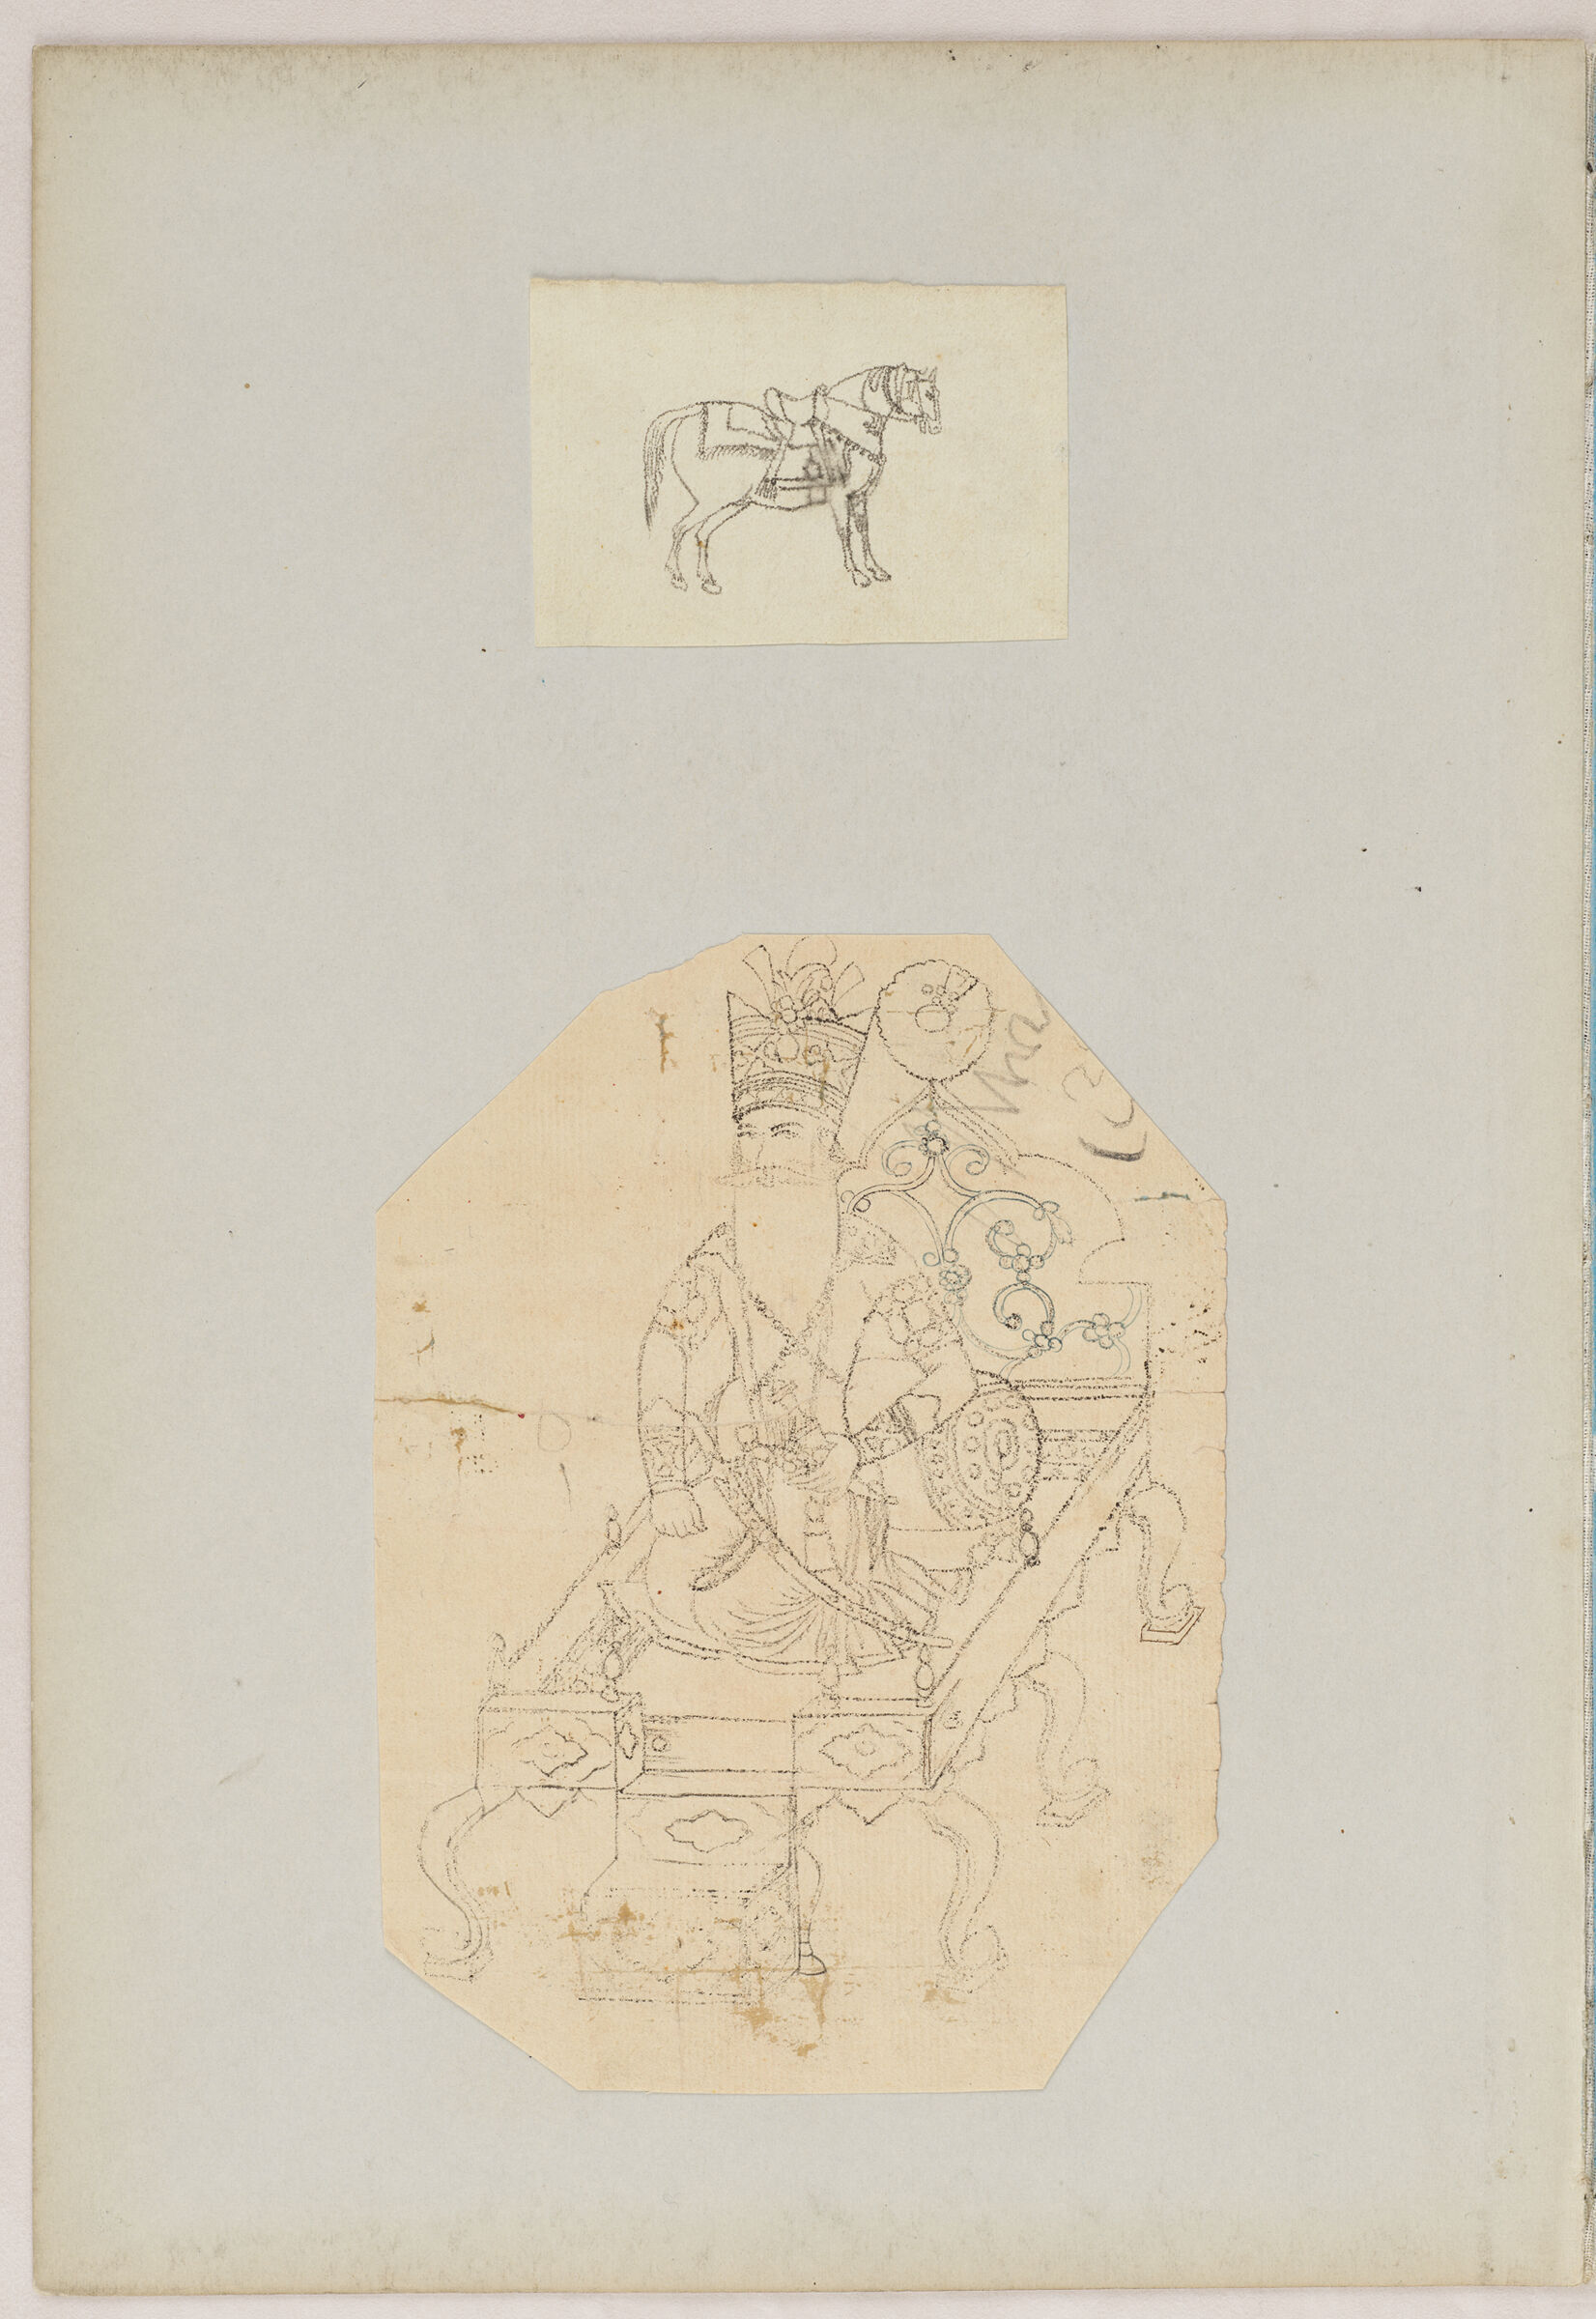 Folio 46 From An Album Of Drawings And Paintings:two Sheets: Horse; Fath Ali Shah Qajar Enthroned (Recto); Blank Page (Verso)